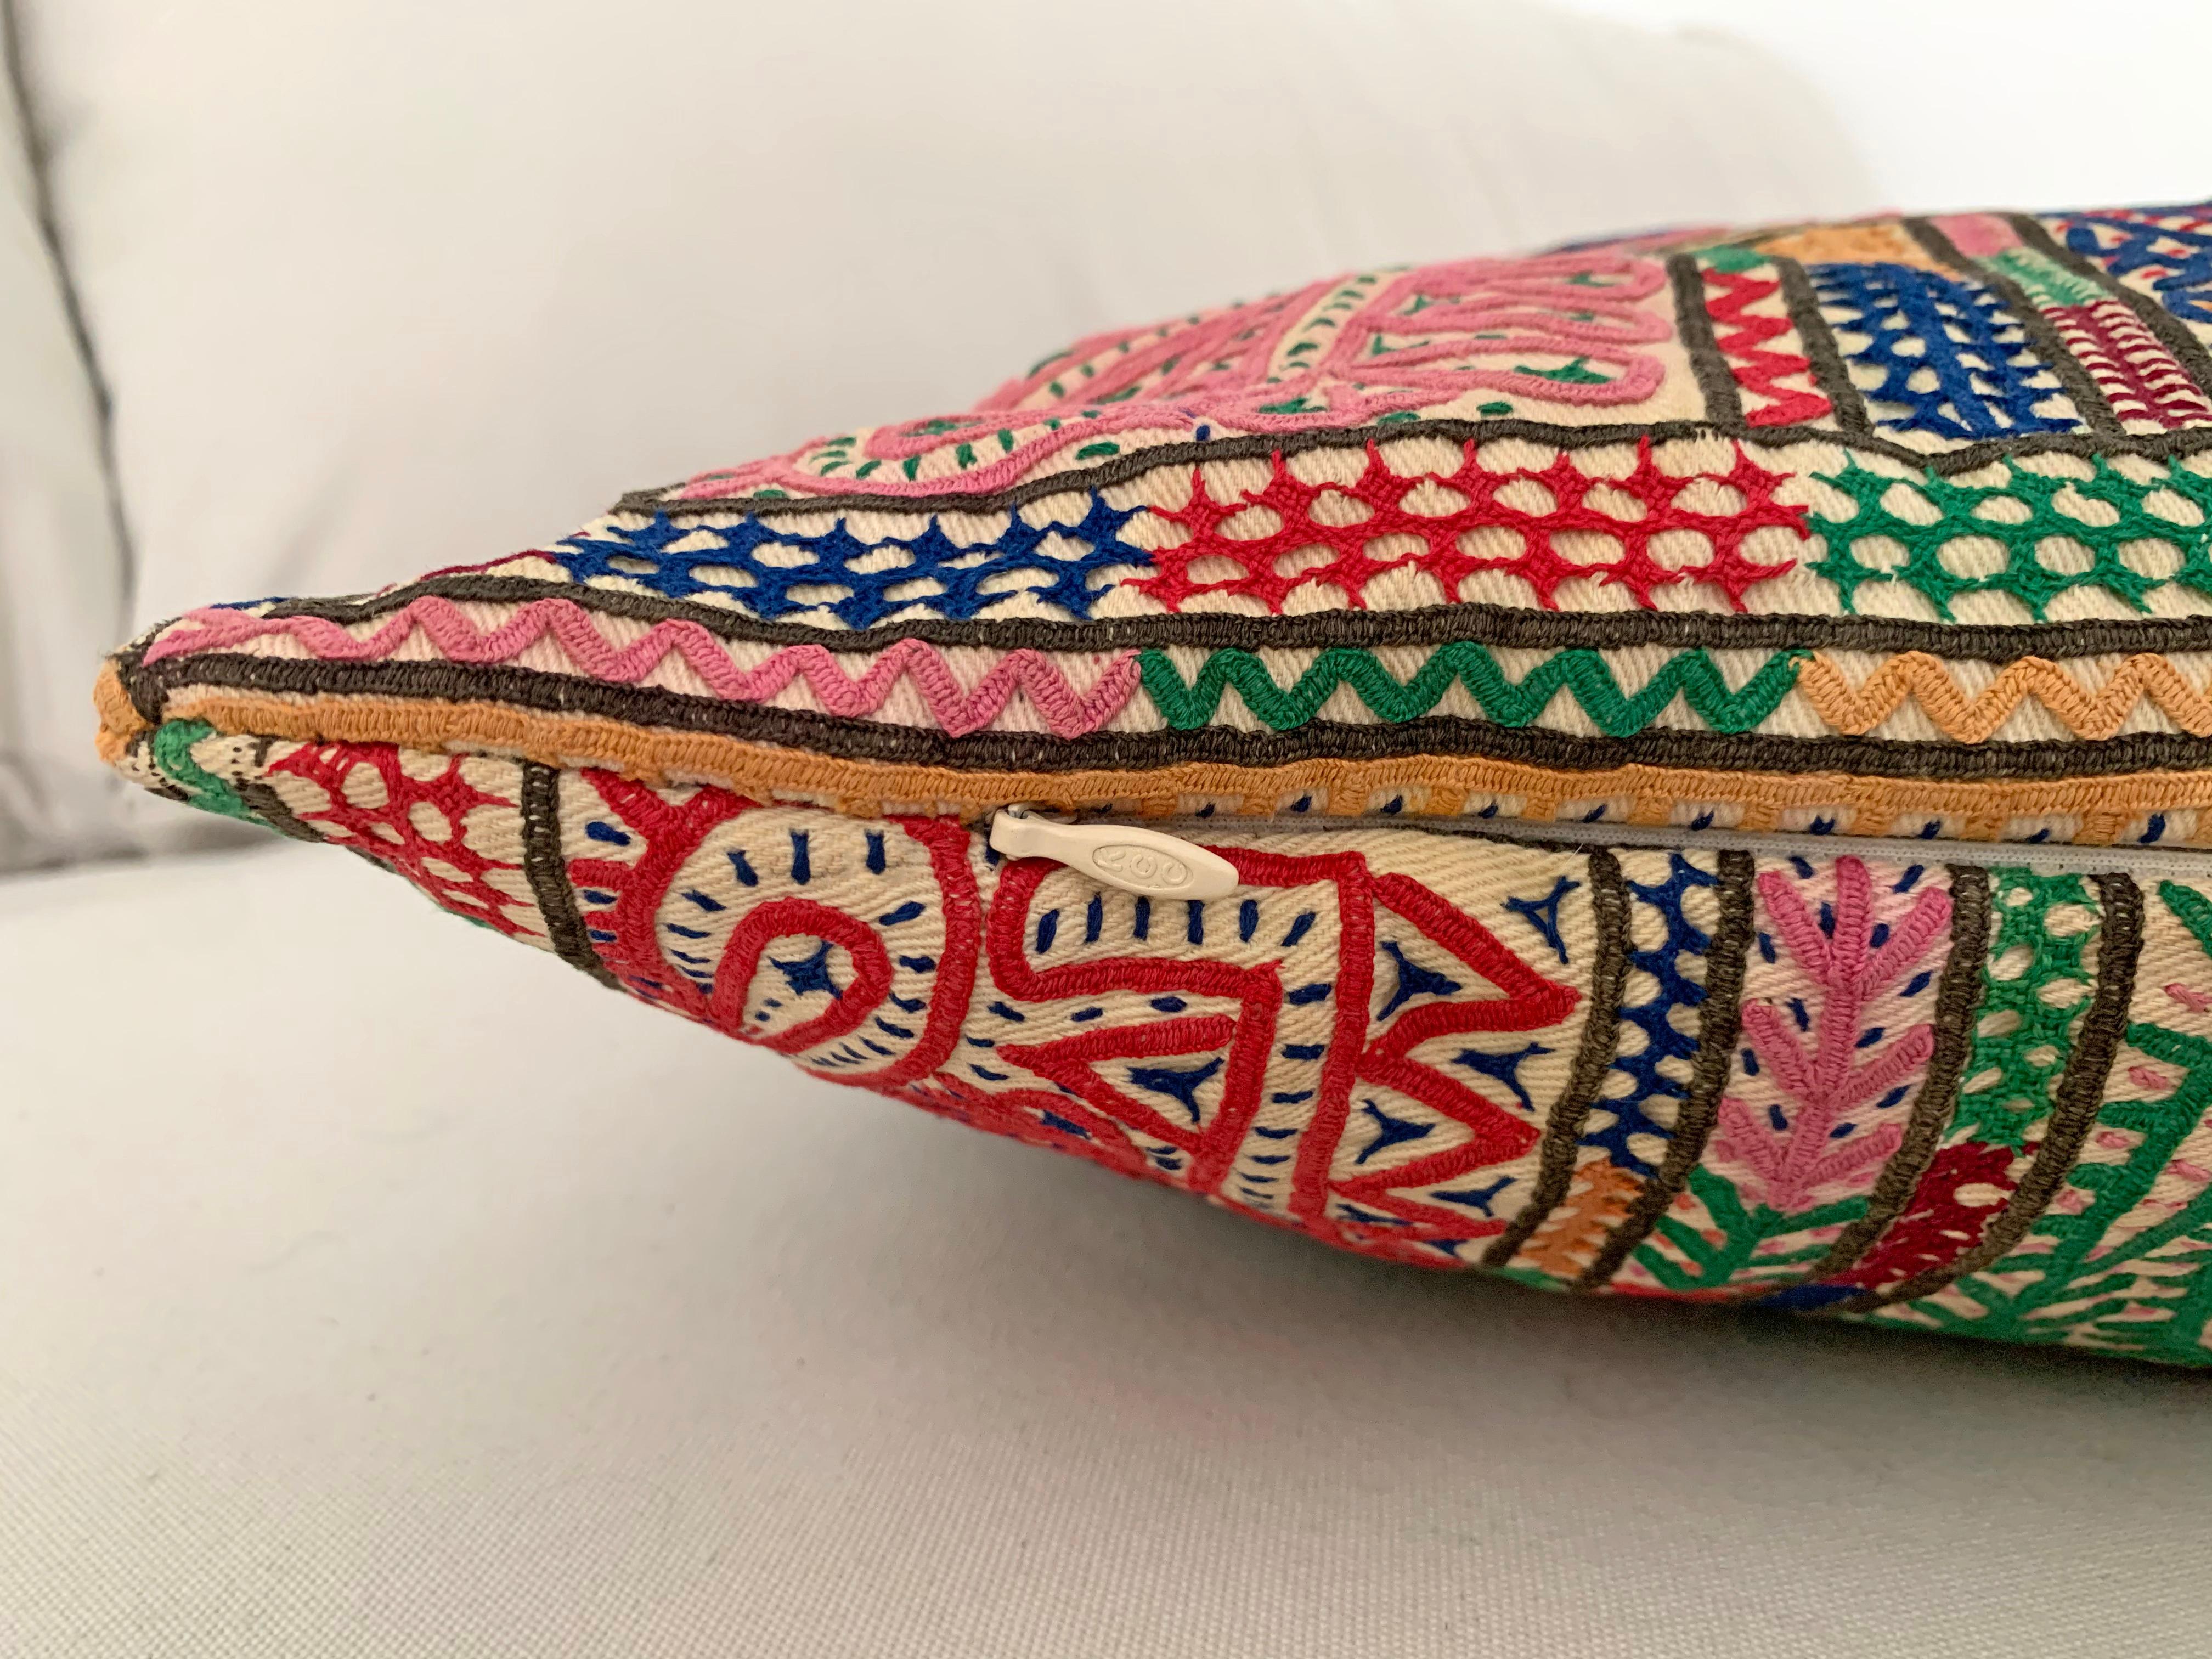 Vintage Indian Decorative Pillow with Colourful Embroidery 1